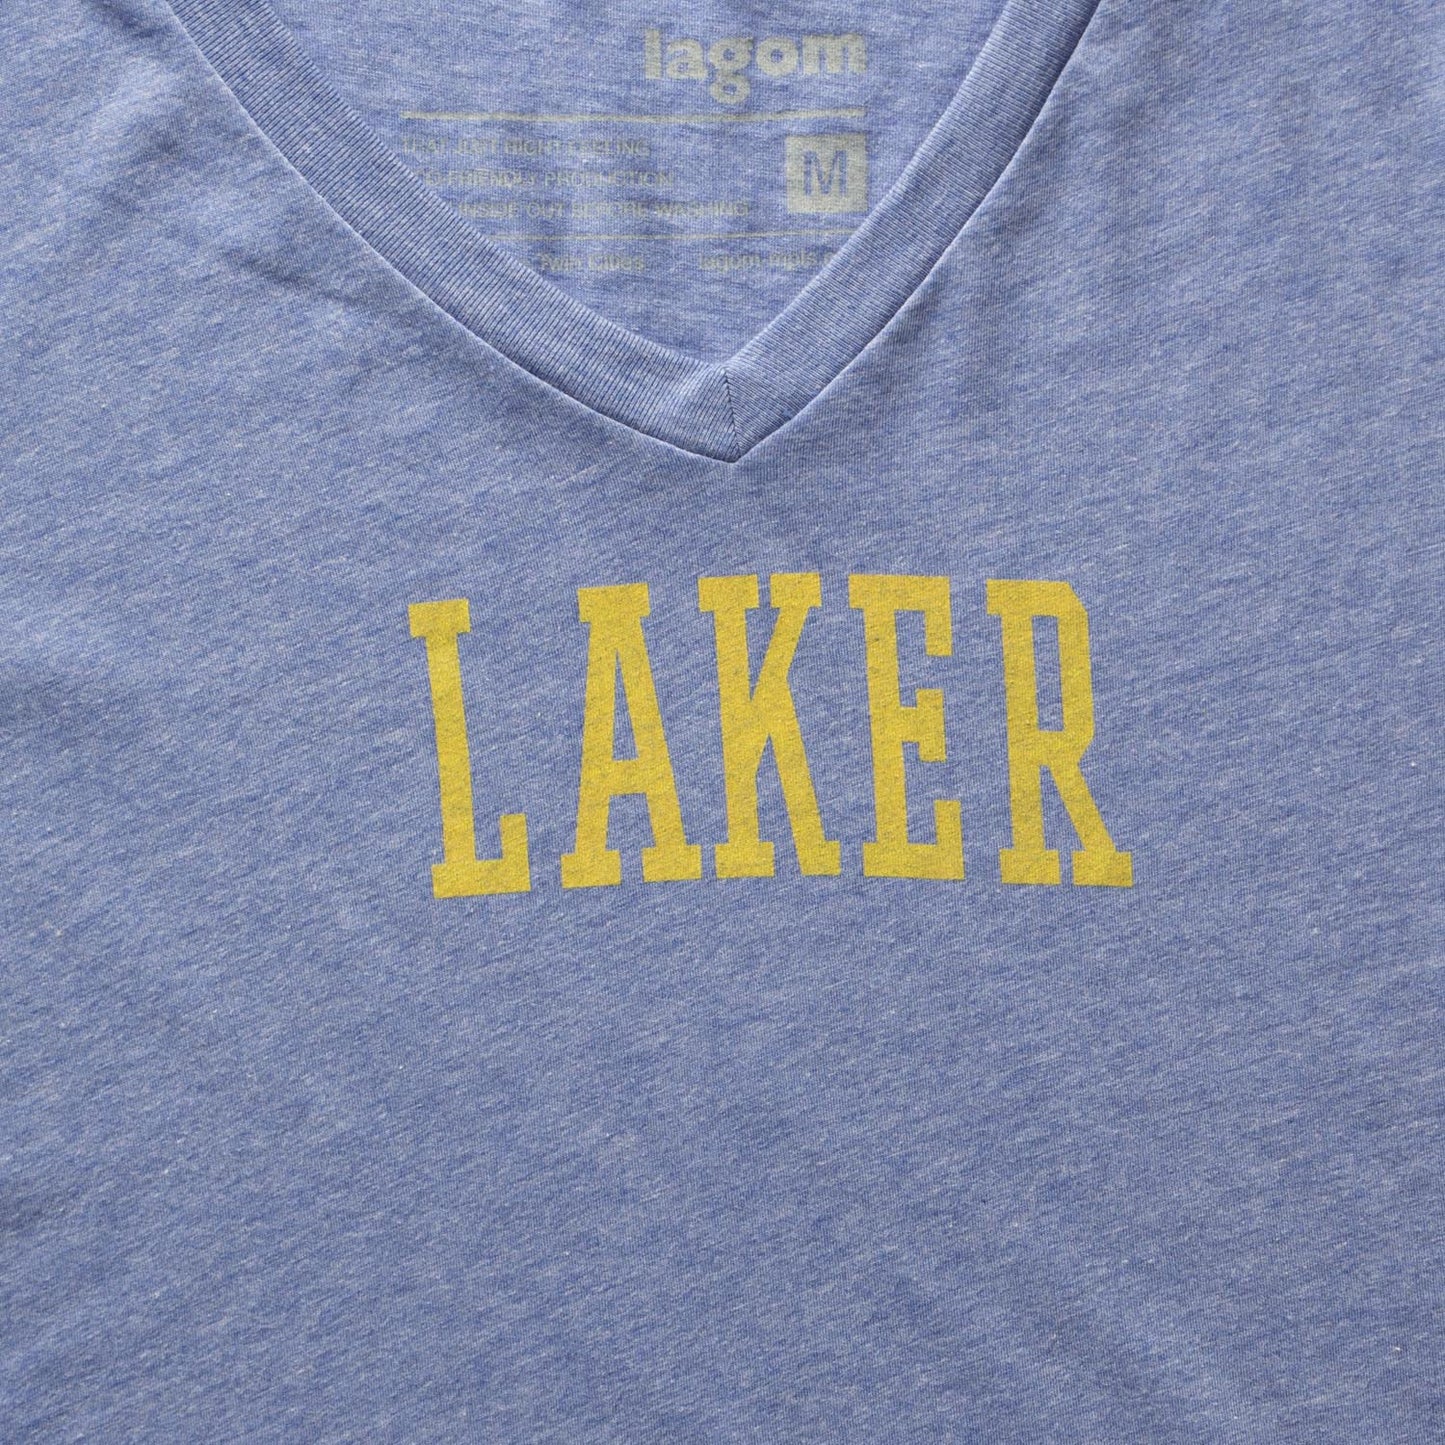 Details of blue t-shirt with LAKER in yellow. Minneapolis Lakers, basketball, 1950's, minnesota, twin cities, minneapolis, st paul, minnesota-themed clothing, clothing, apparel, accessories, gifts, goods, t-shirt, t shirt, tee, t-shirts, t shirts, tees